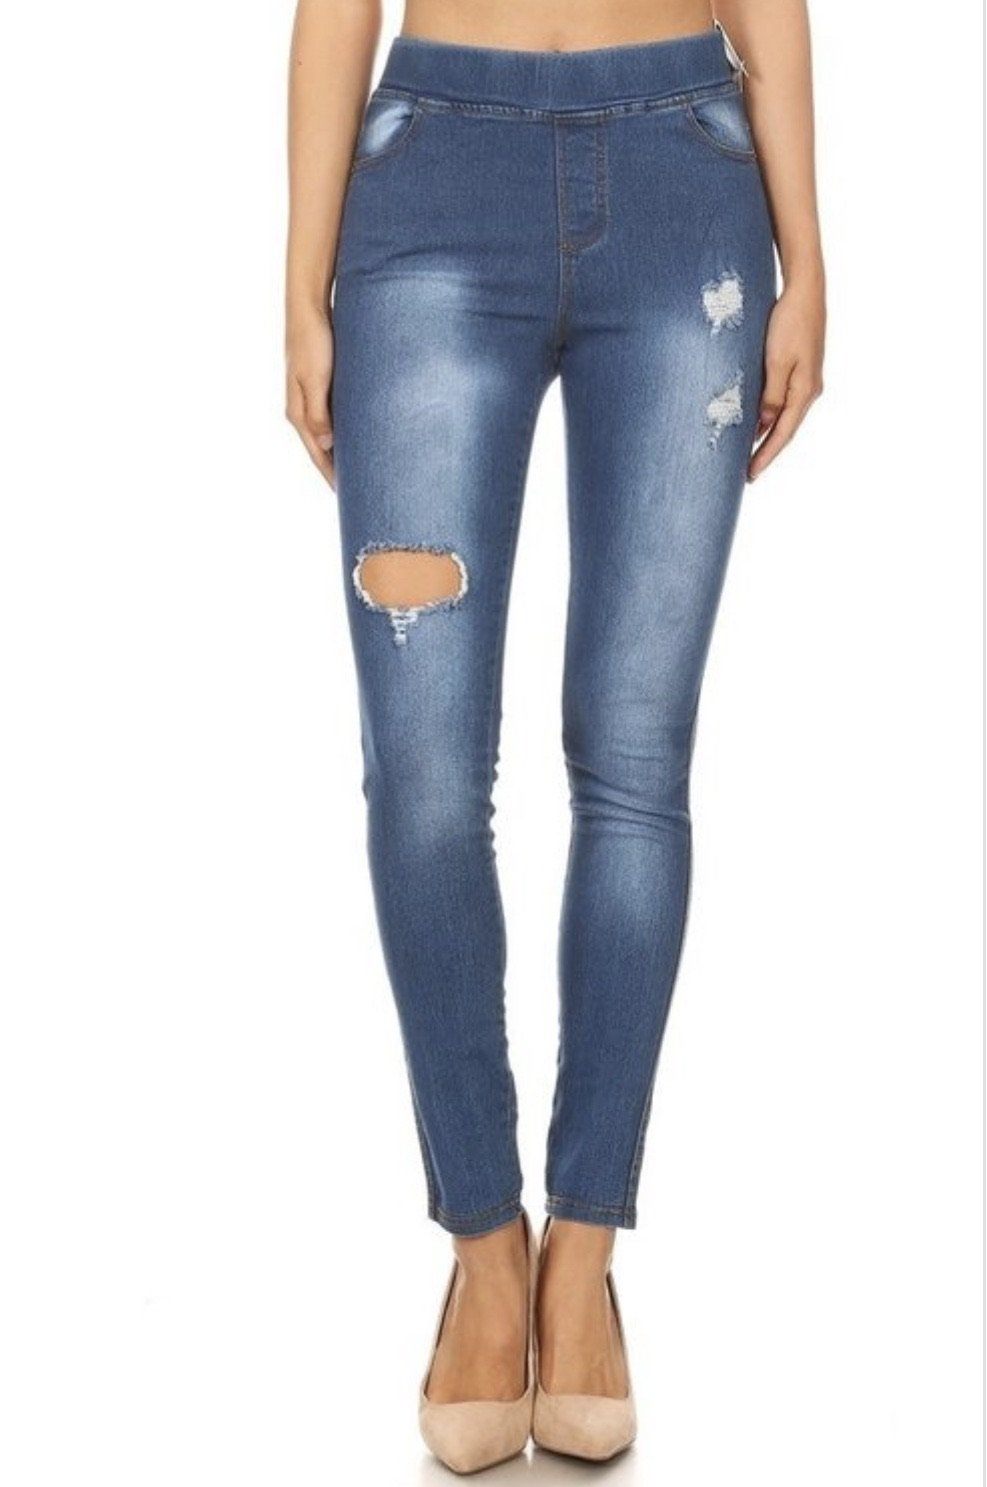  Womens Stretch Pull-On Skinny Ripped Distressed Denim  Jeggings